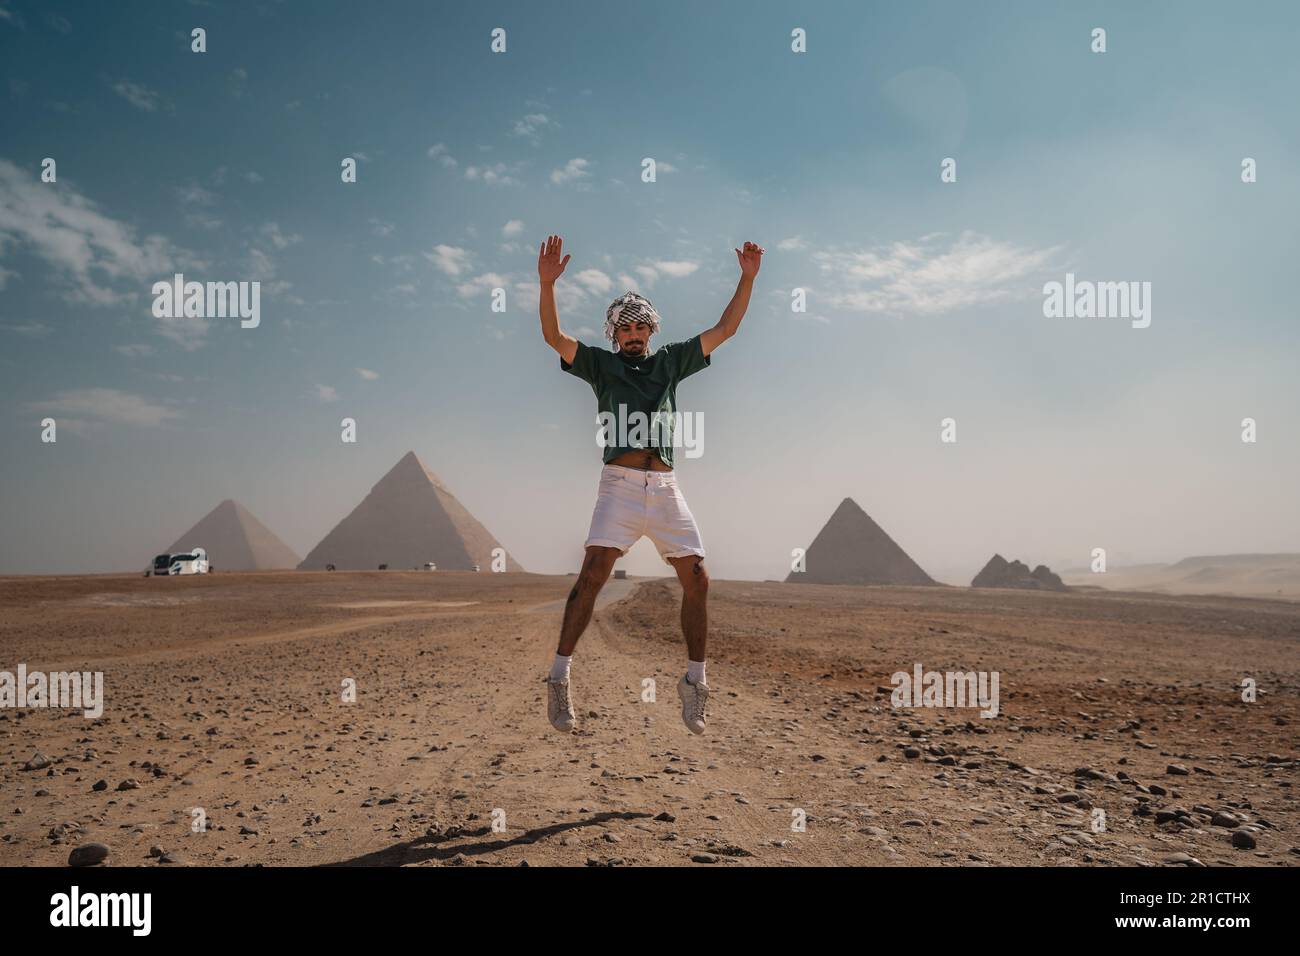 young man with a turban jumps in the desert with the pyramids in the background. Cairo. Egypt Stock Photo